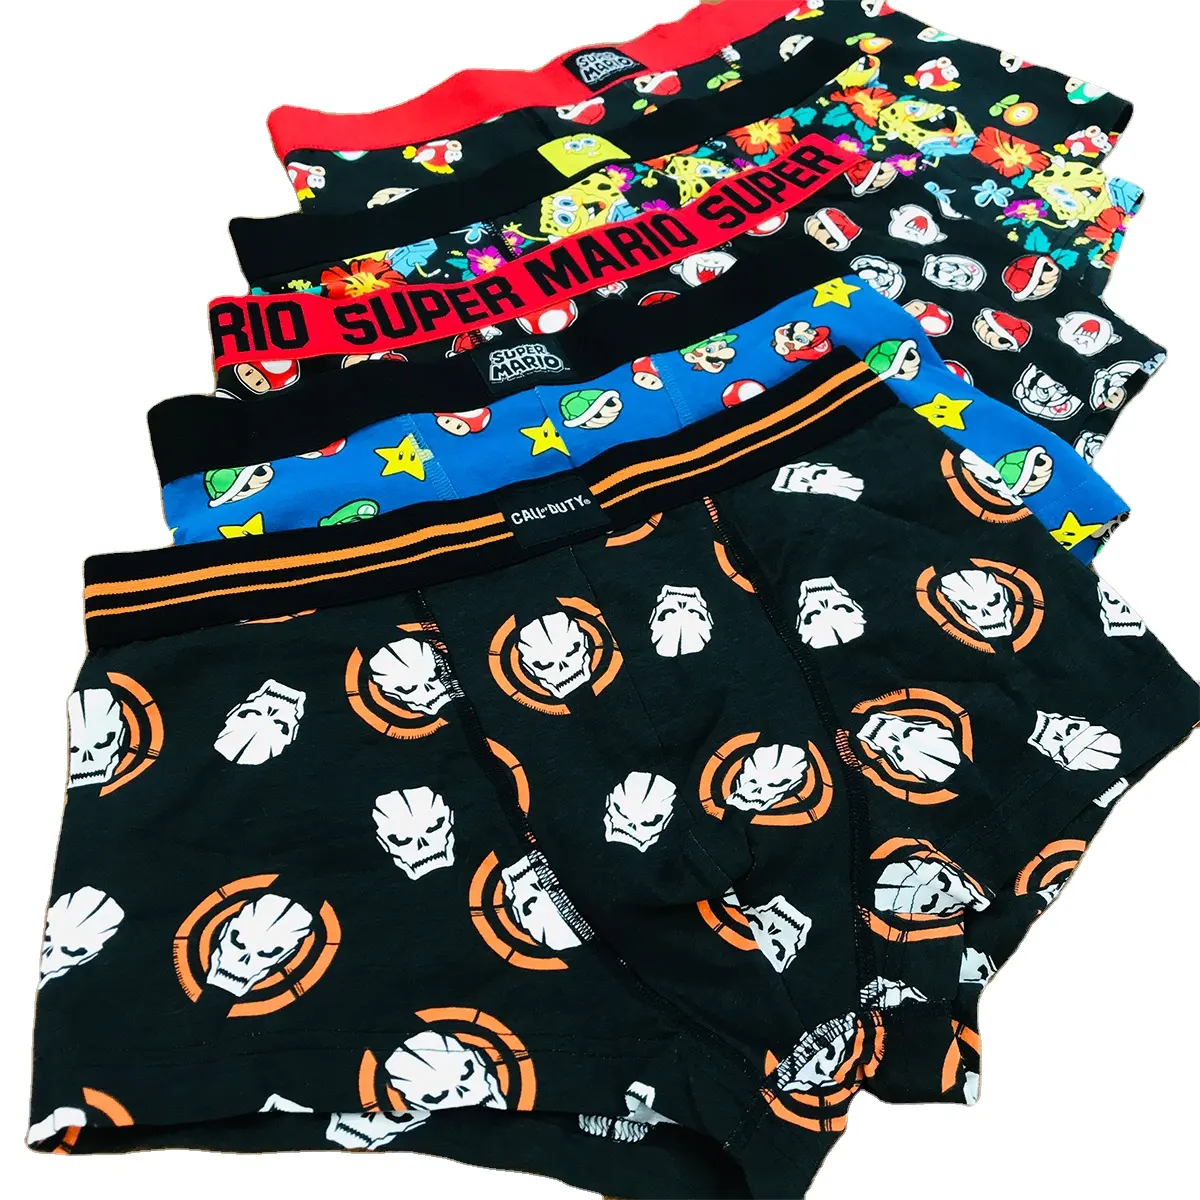 Men's Breathable Factory Custom Cotton Printed Everyday Boxers Shorts with Elastic Waistband Stretch Comfort mens briefs Boxer